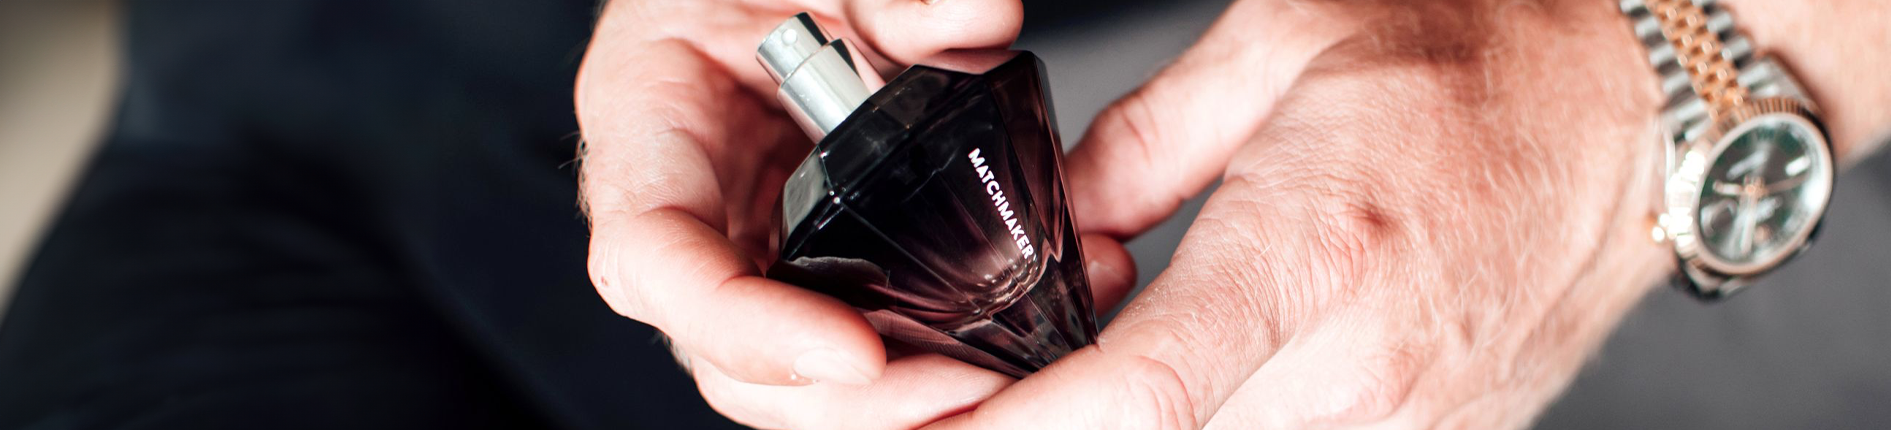 Pheromone Cologne To Attract Women